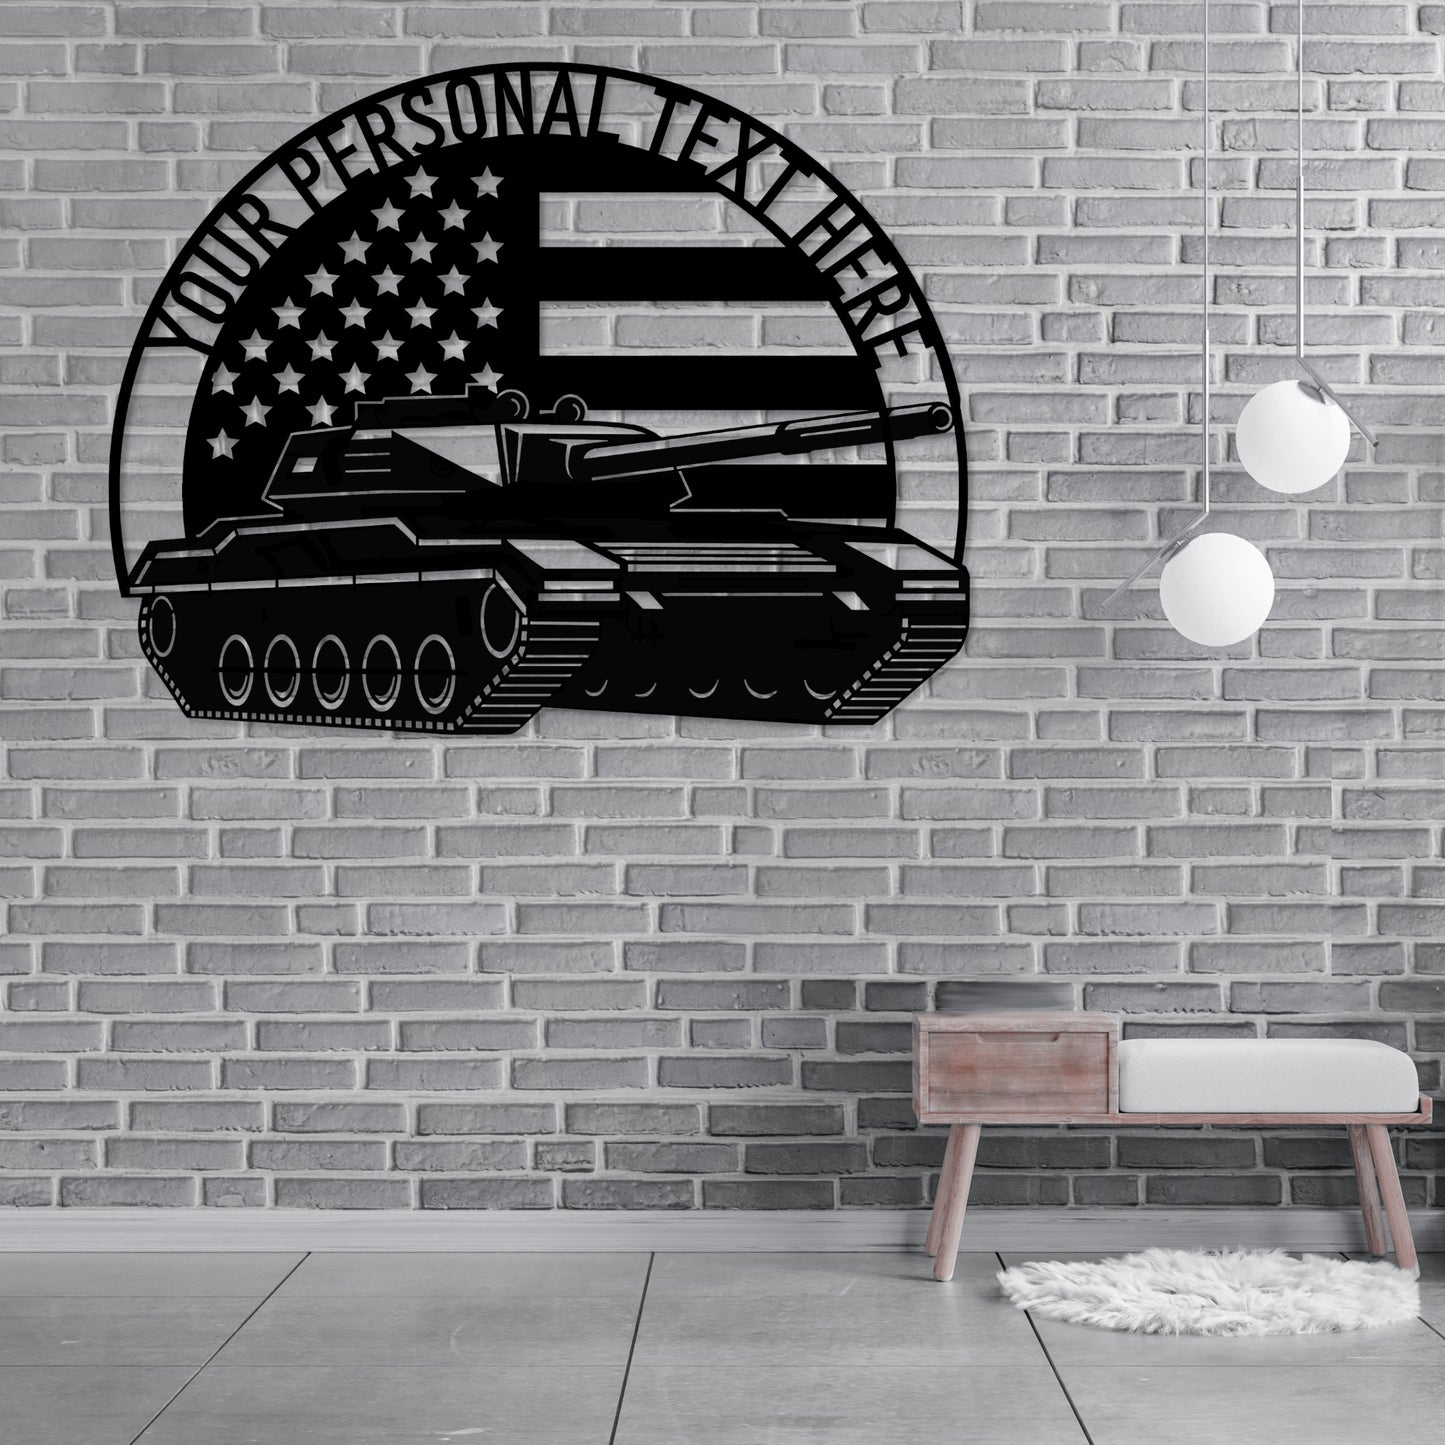 Personalized Patriotic US Battle Tank Metal Sign. Military Combat Vehicle Wall Decor Gift. Army Tank Wall Hanging. US Soldier Veteran Gift. 